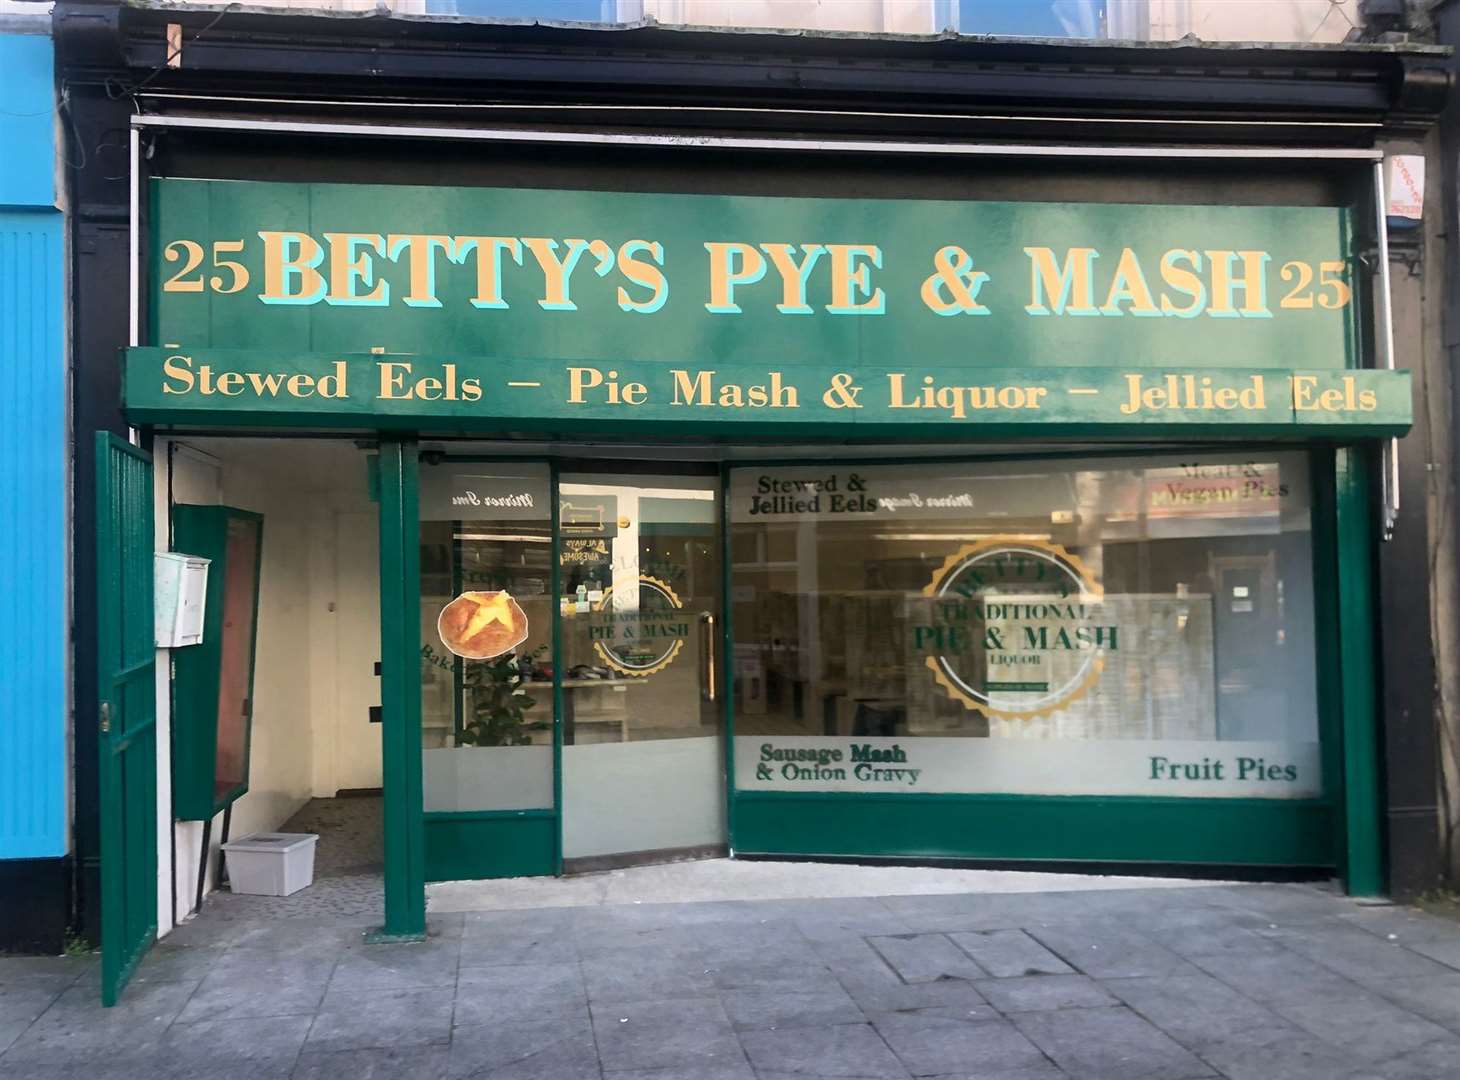 Betty's Pye and Mash shop in Guildhall Street, Folkestone, opens this week